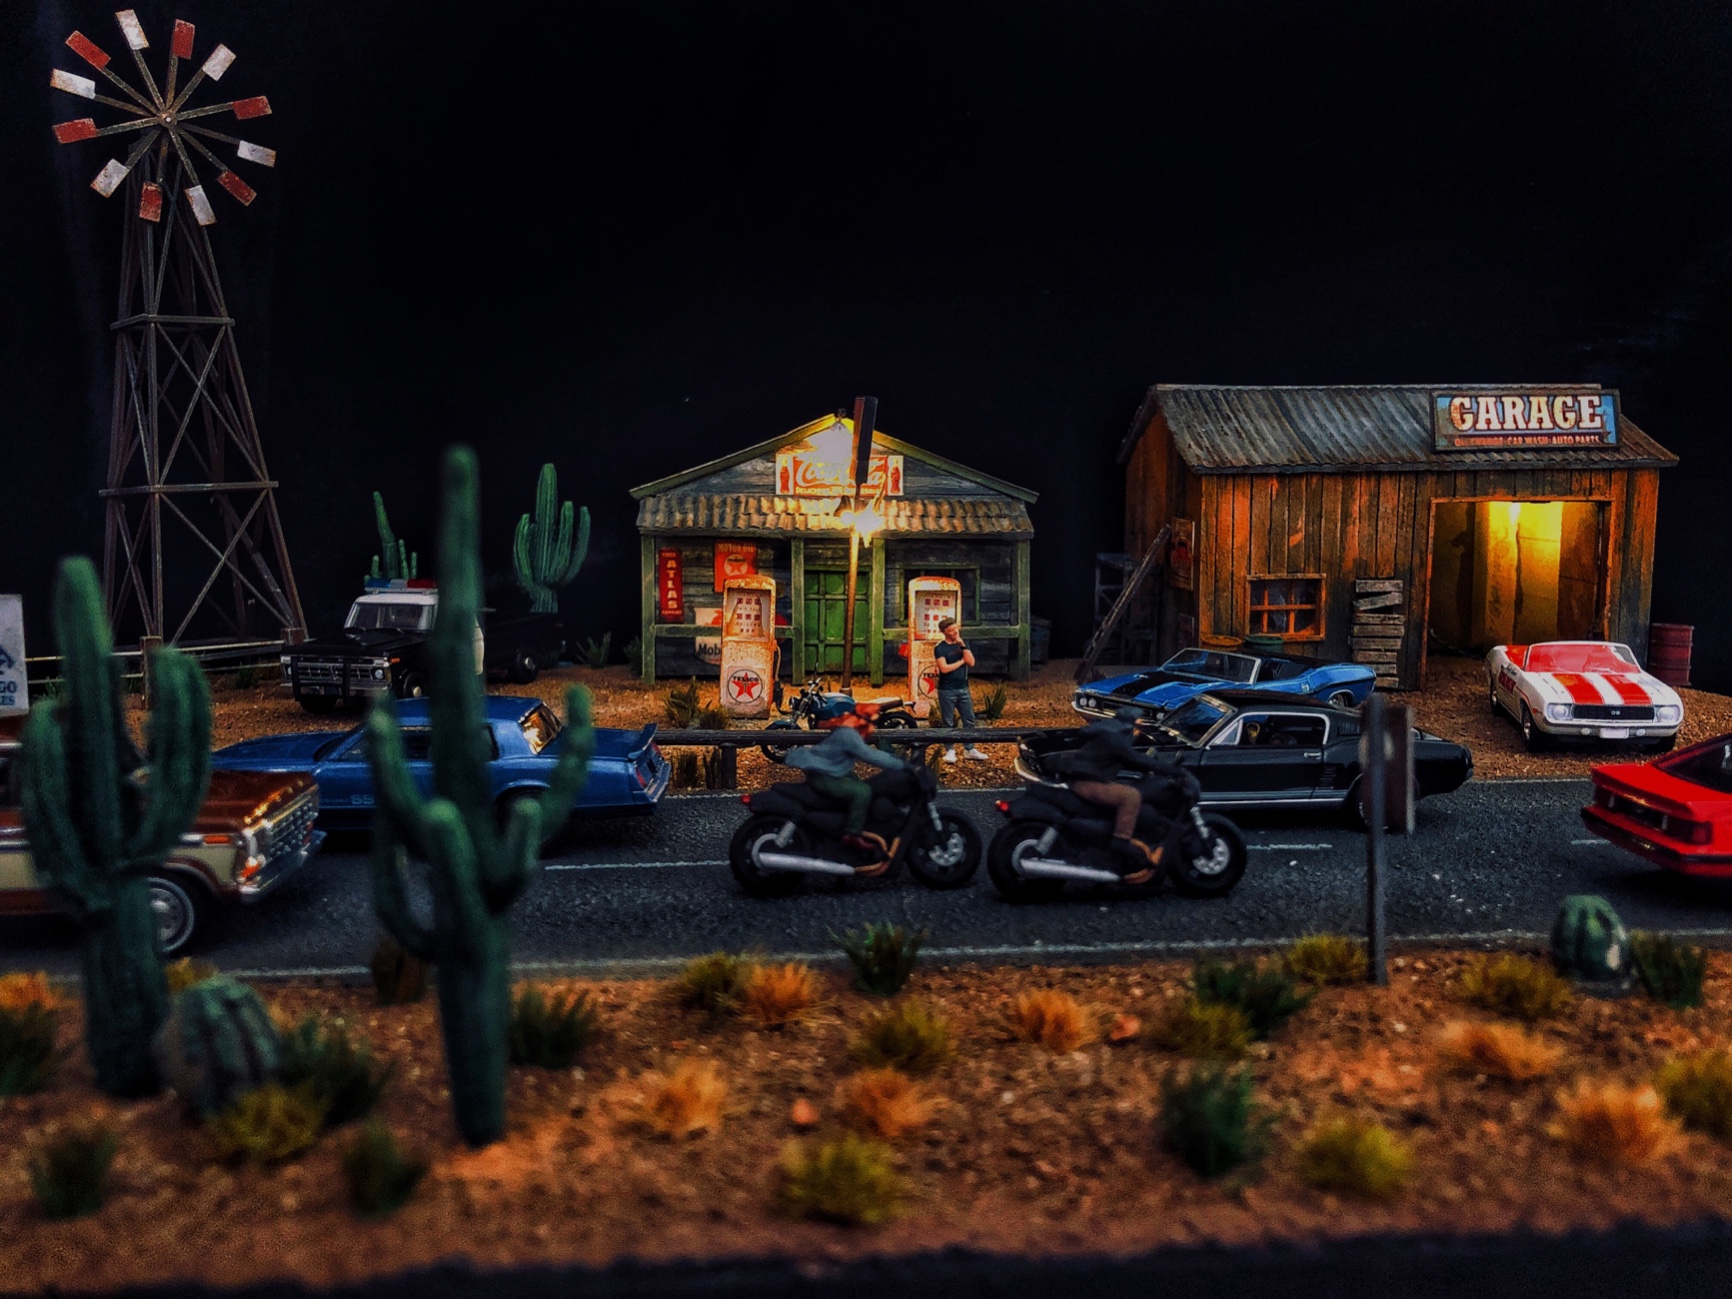 1/64 Scale Route 66 Diorama, Suitable for 1:64 Die-cast scale model cars, classic Route 66 Decor old windmill, Coca Cola, Gas station, Western style, Cactus. welcome Route 66..